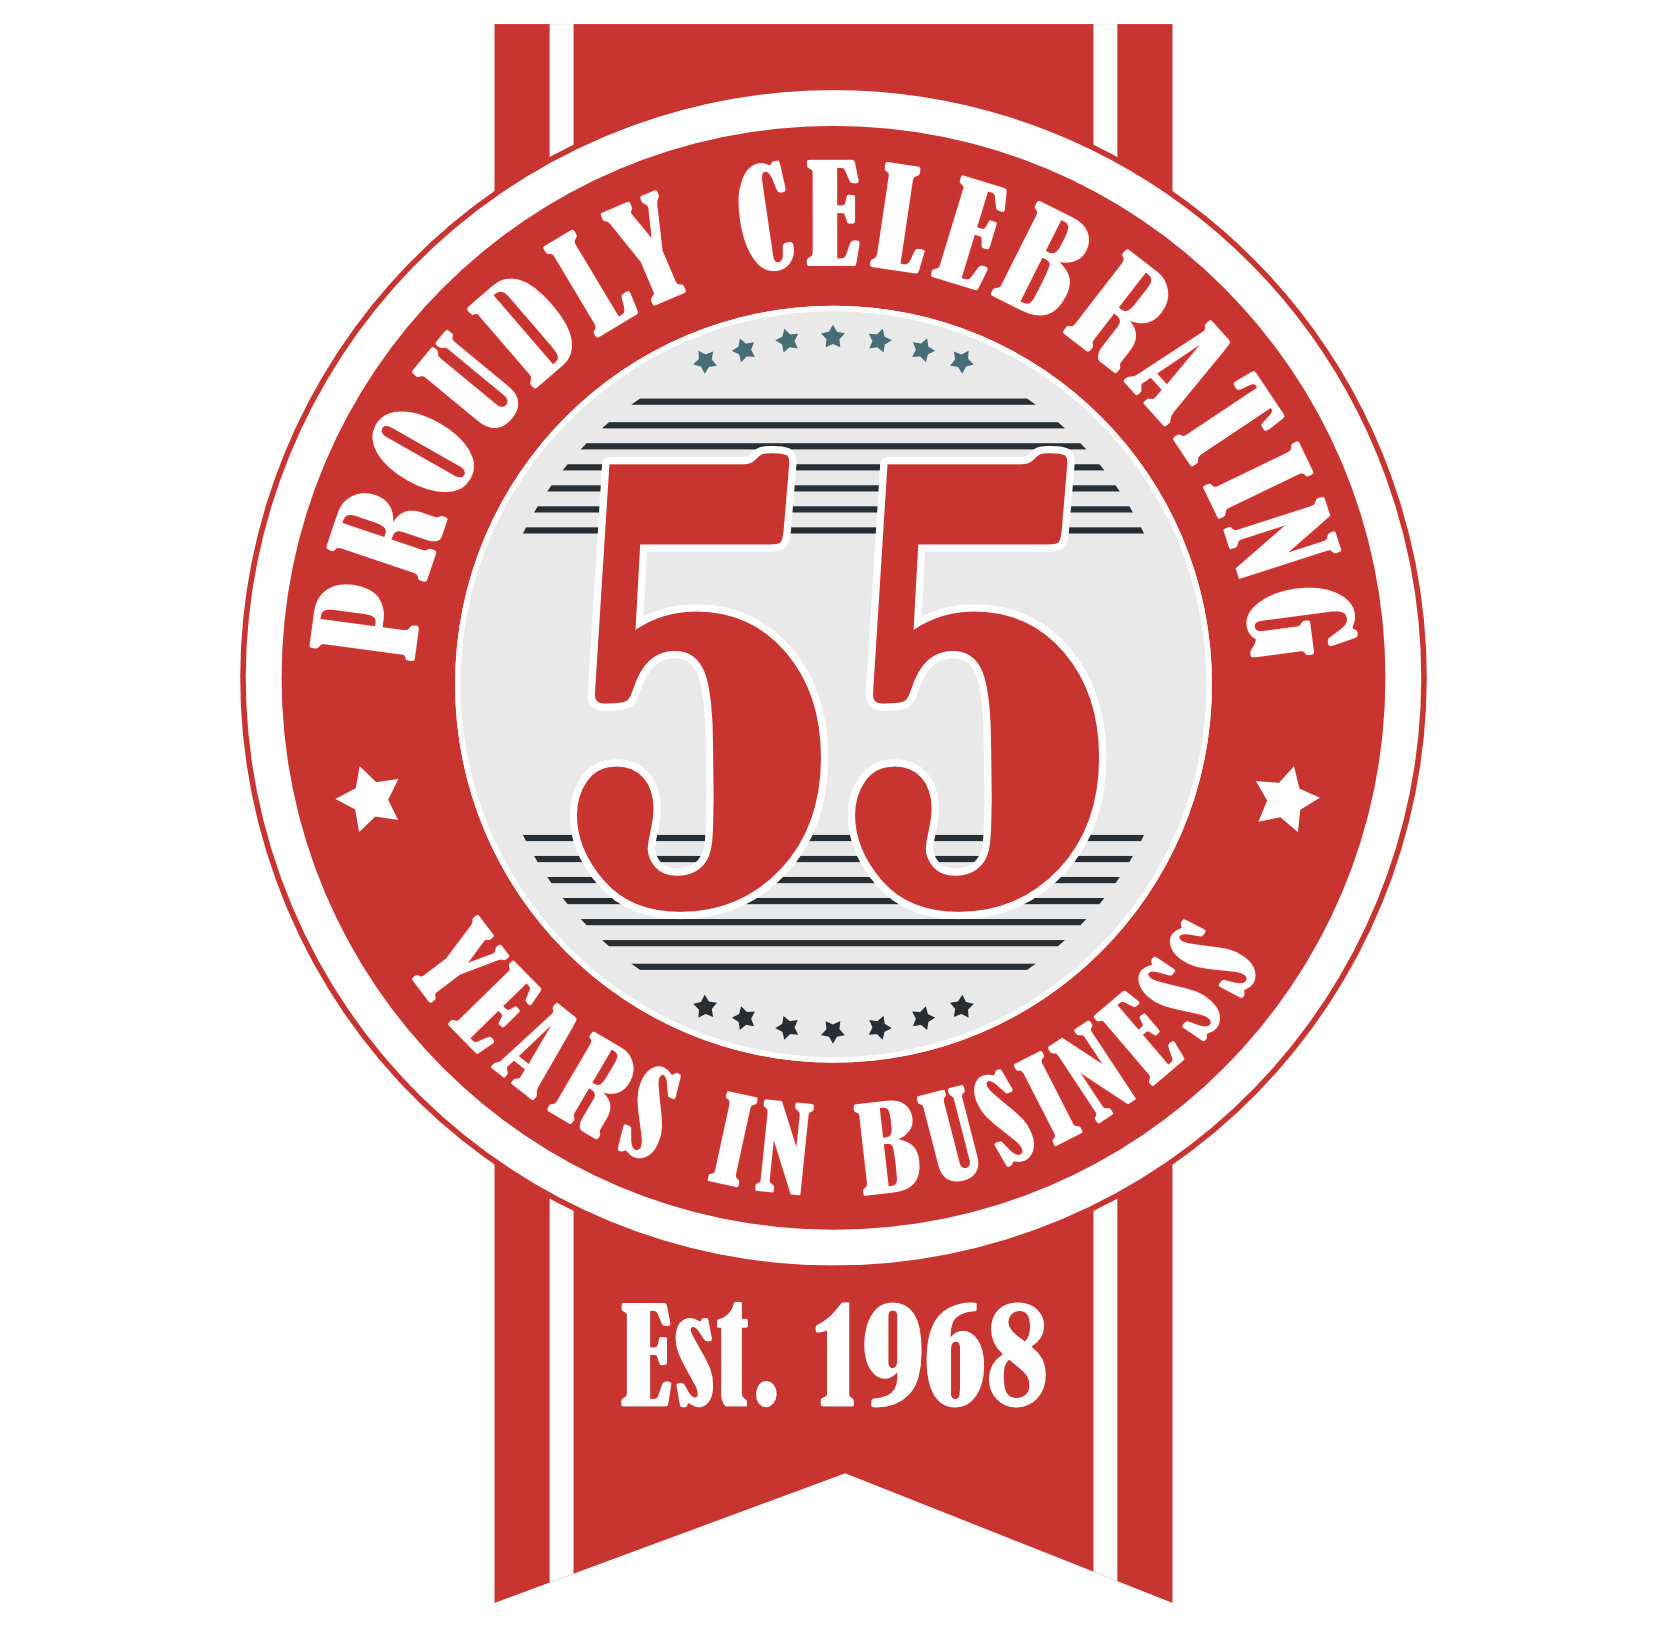 Celebrating 53 years of service and success